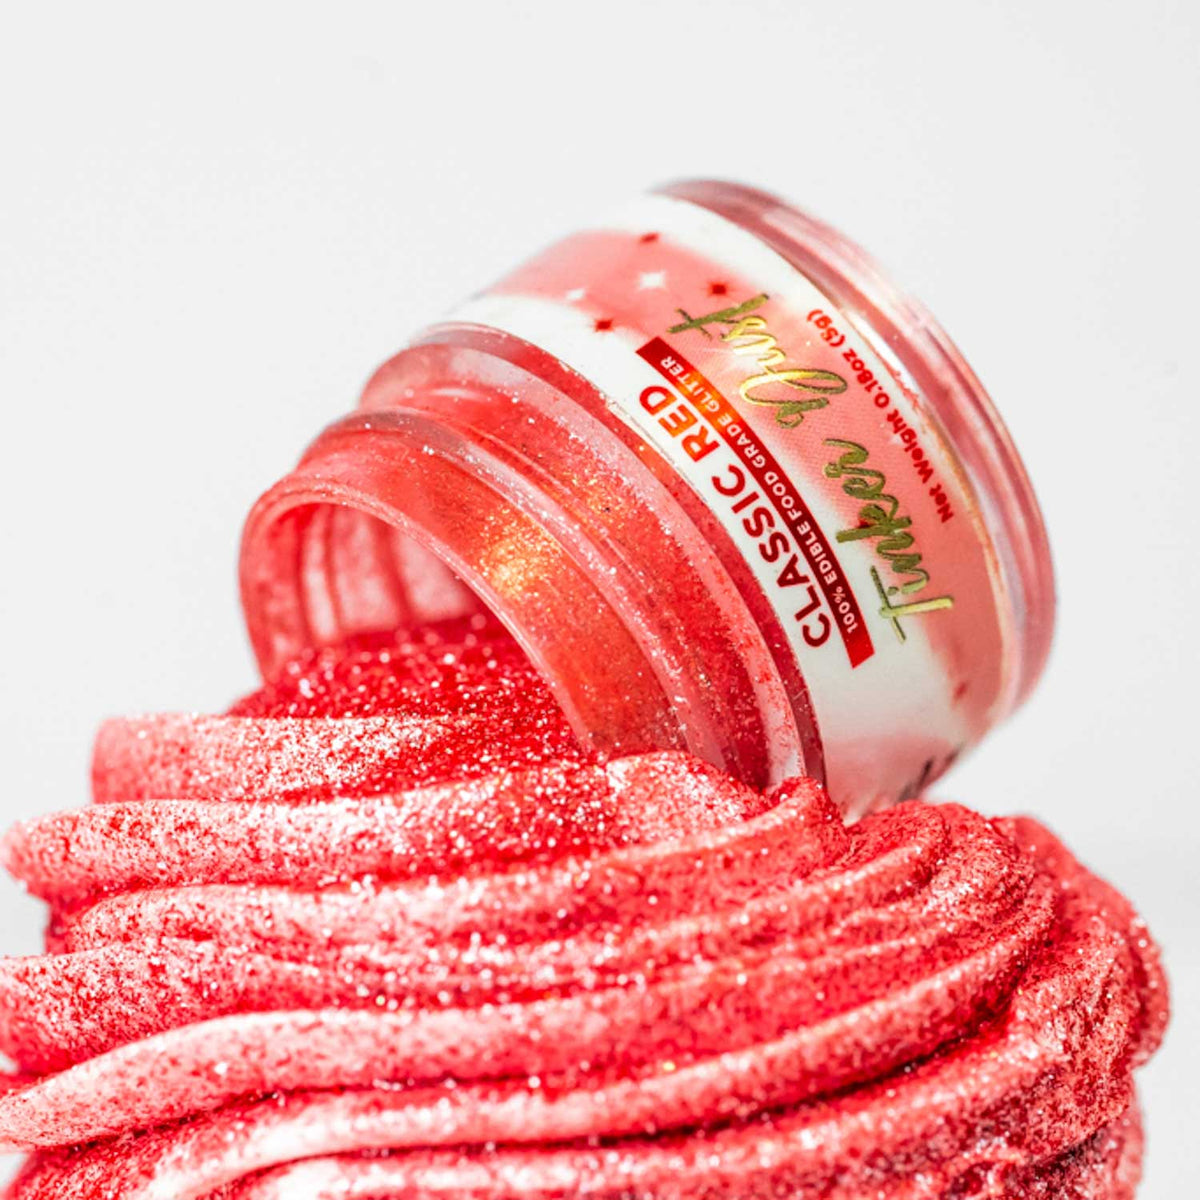 Cake Edible Glitter - Certified and Food Grade Glitter - Bright and  Pearlescent Edible Glitter Dust - Edible Glitter for Strawberries,  Cupcakes, Cake Pops, Drinks and Desserts (Classic Red) 